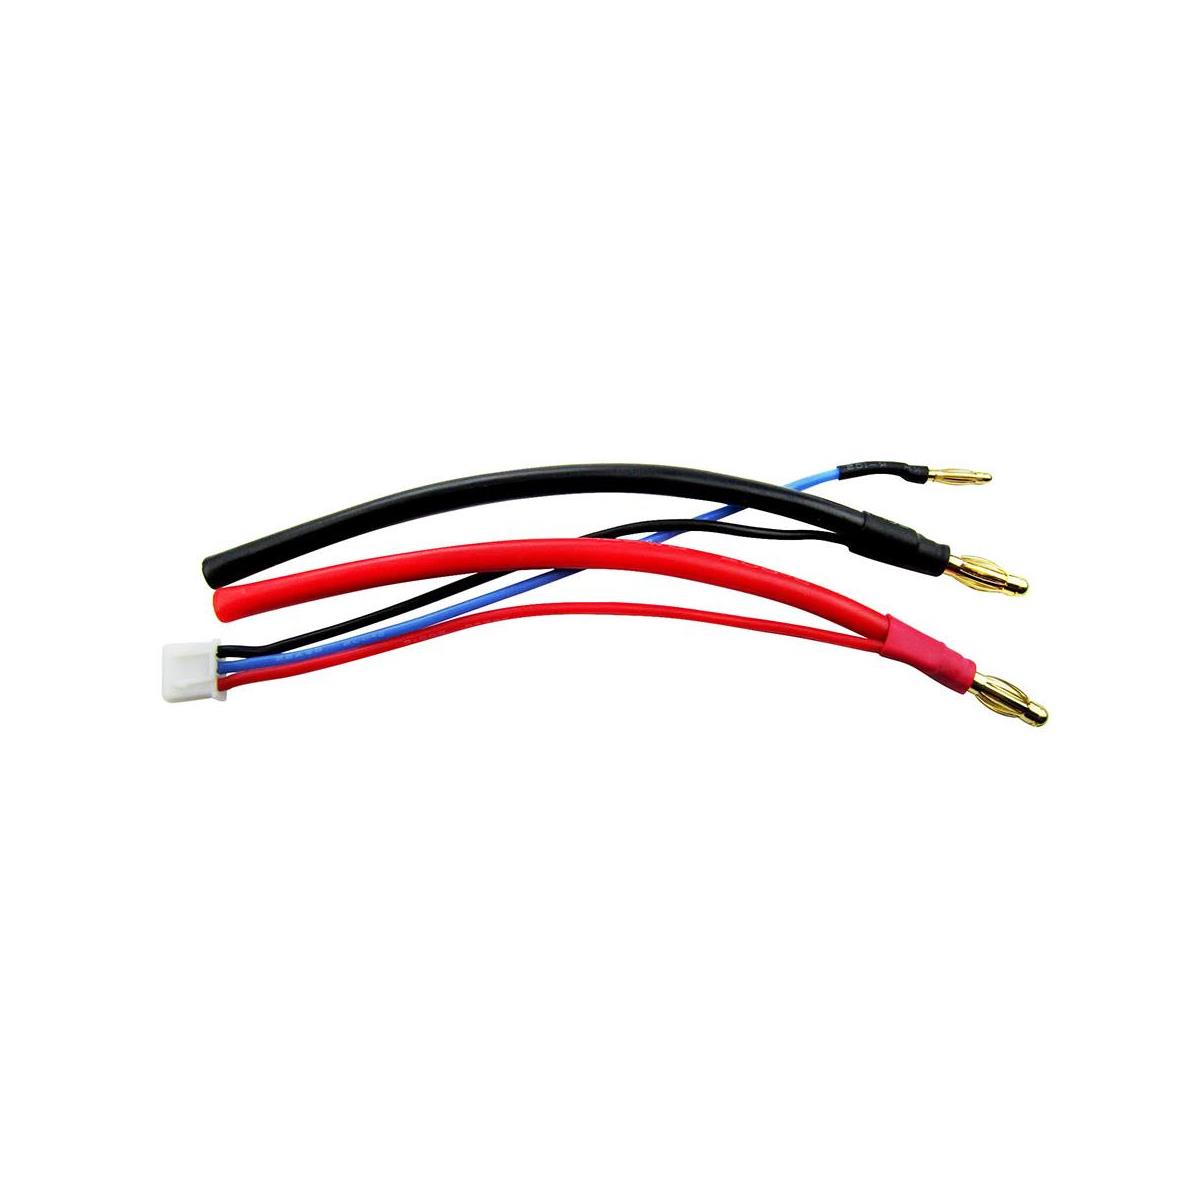 Image of COMMON SENSE RC Car Pack Balance Harness with Discharge Leads - for 2S Lipos